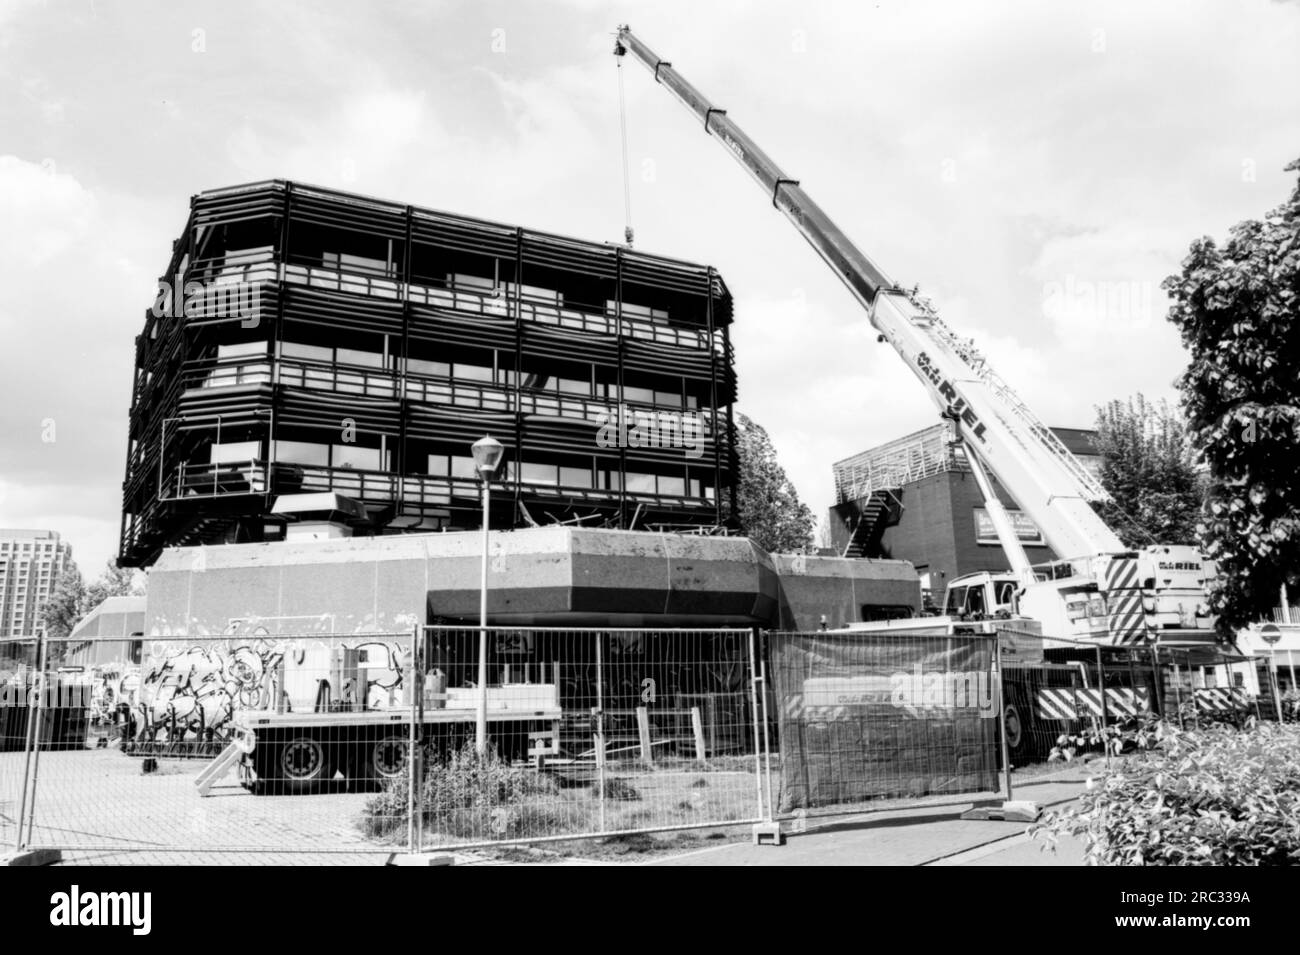 Demolishing the iconic 'Blue Building', originally constructed during the 1970's to house the offices of Social Services of the Municipality. Tilburg, Netherlands. Stock Photo